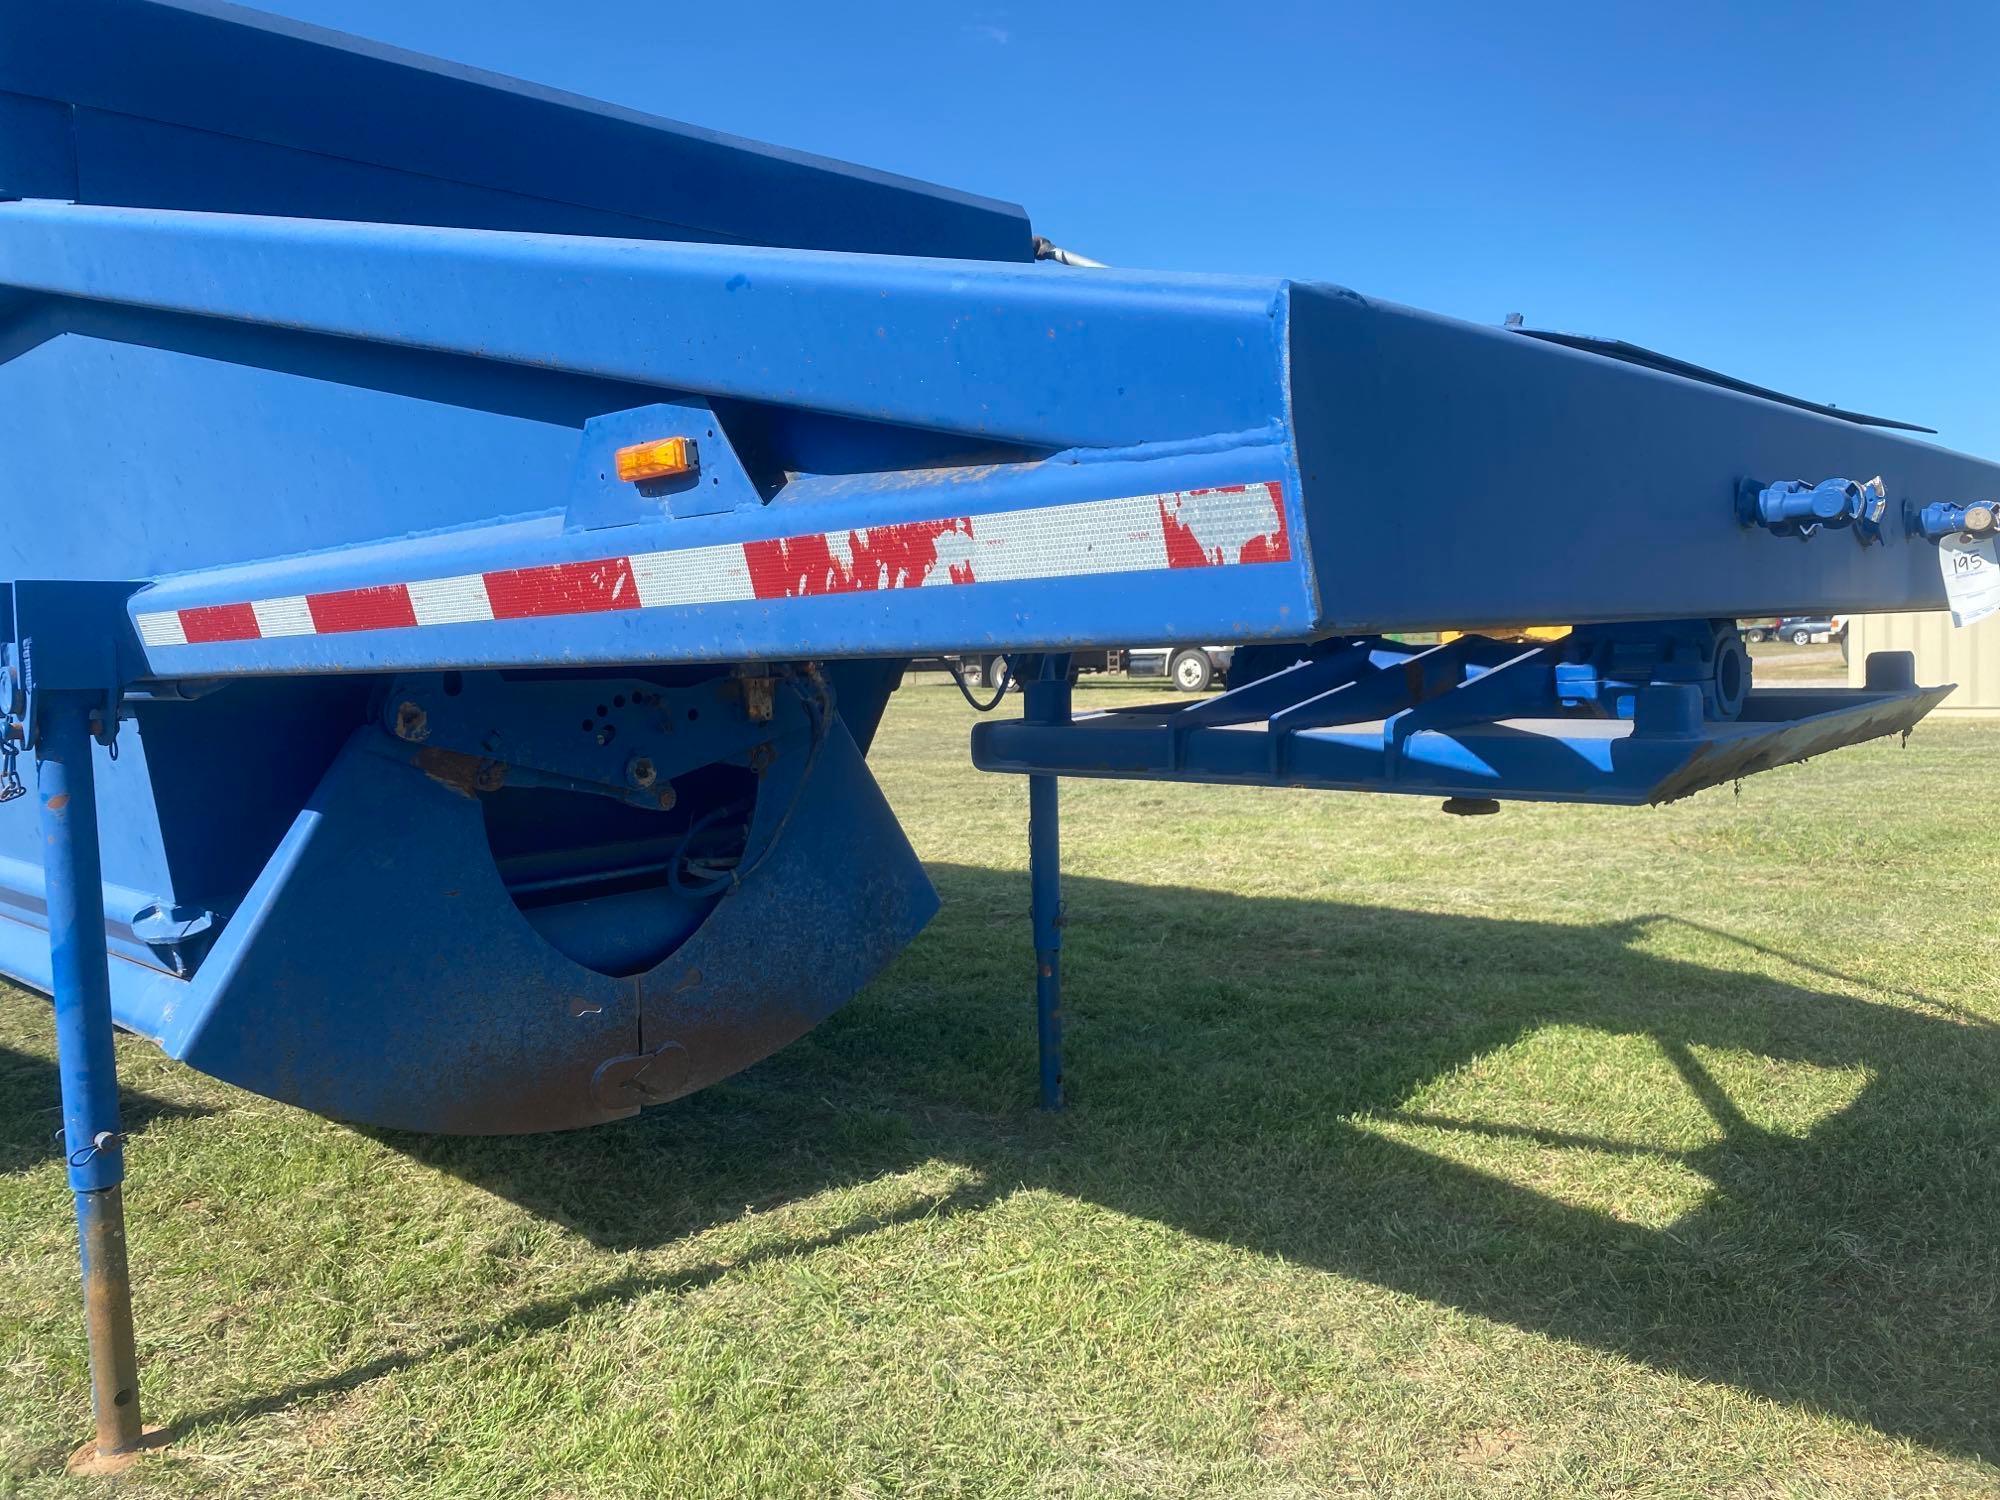 1983 Load King Dump Trailer Very clean trailer, works as it should... VIN 12629 SELLS WITH A TITLE..